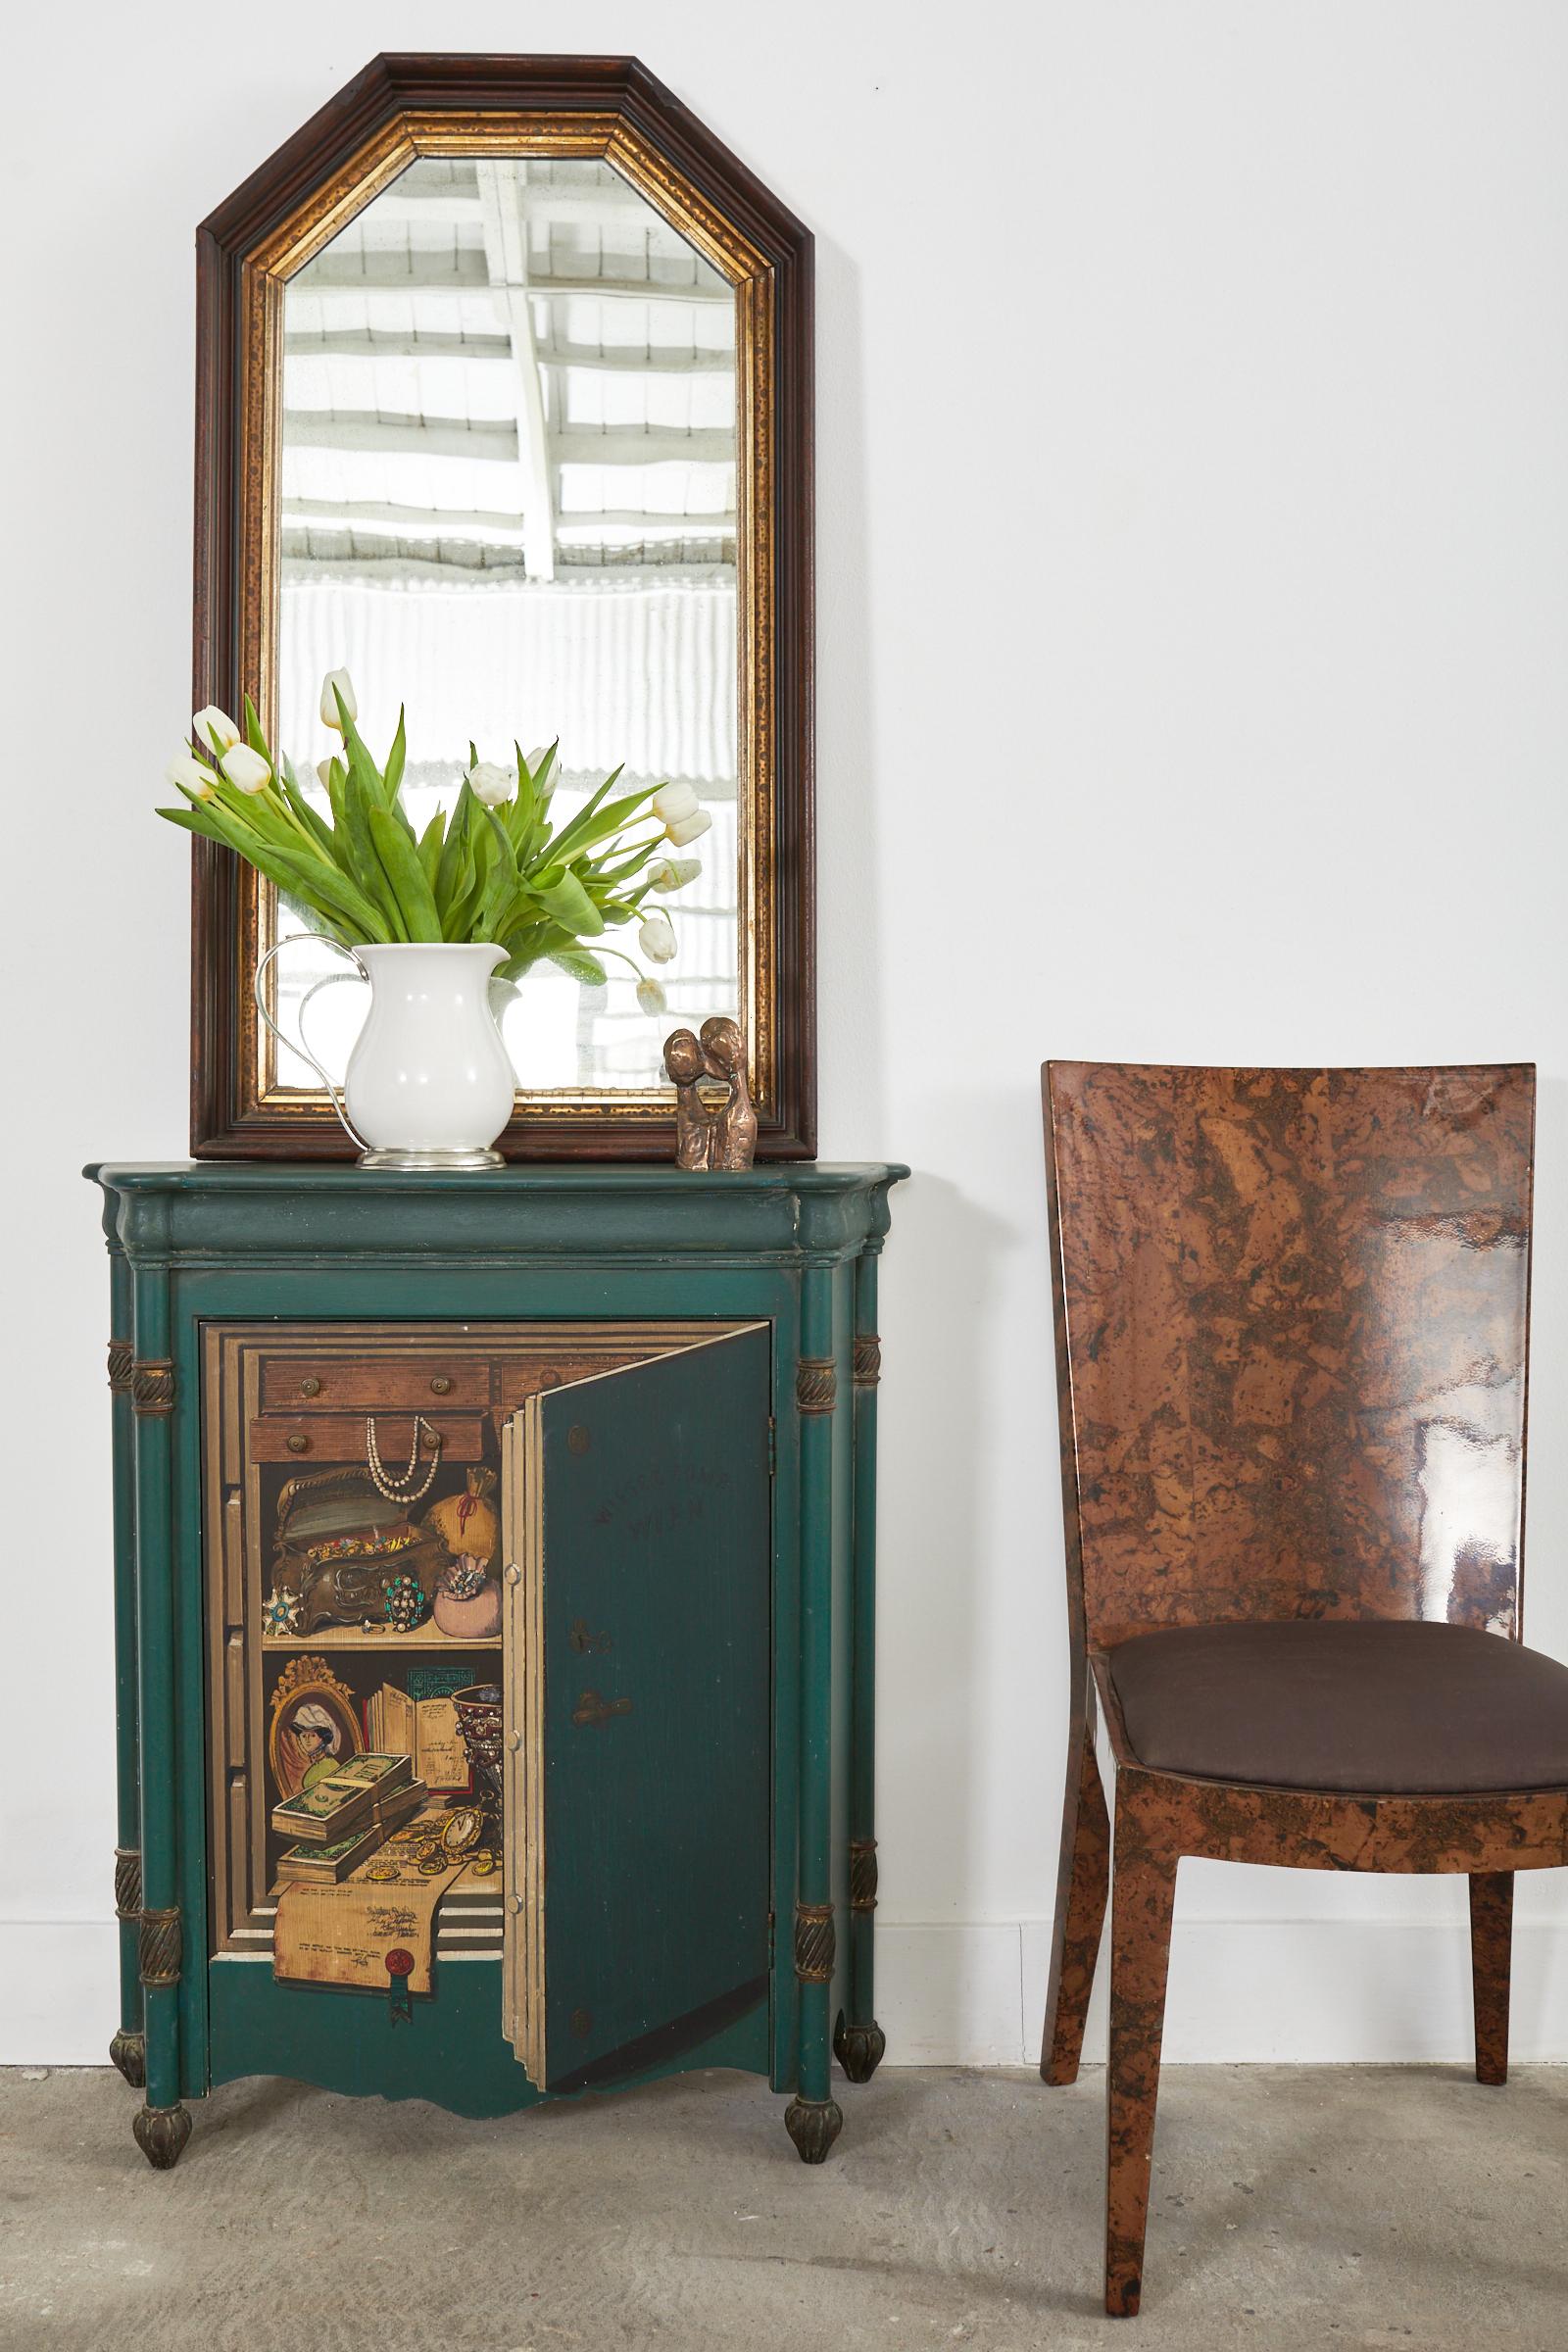 Fantastic mid-century modern Italian cabinet or bookcase made in the manner and style of Fornasetti by Palladio. The green painted wood cabinet features a case decorated to appear as a floor safe with an open front door. The whimsical painting